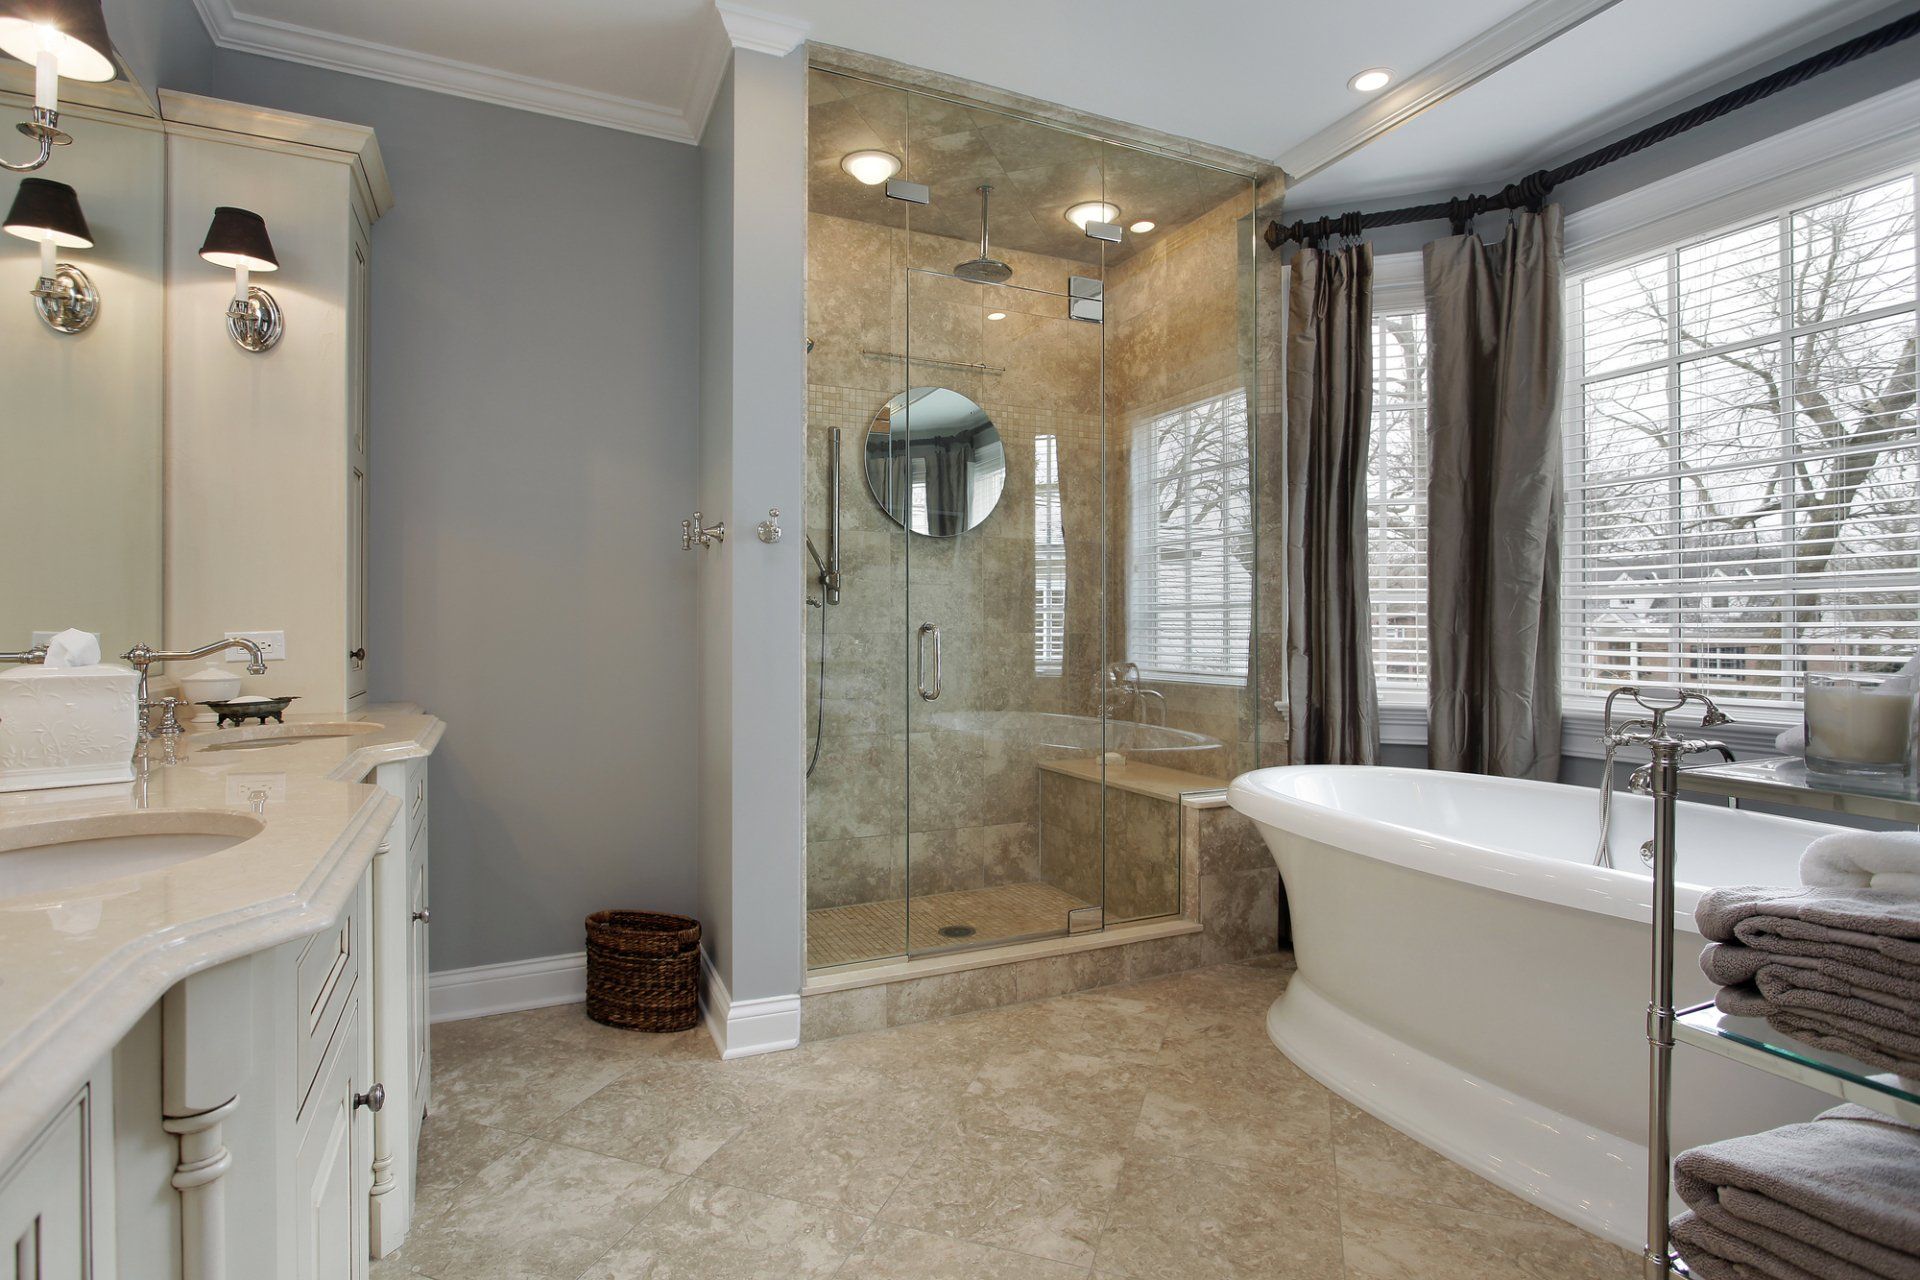 Bathroom Remodeling in Deerfield, IL | All Quality, Inc.